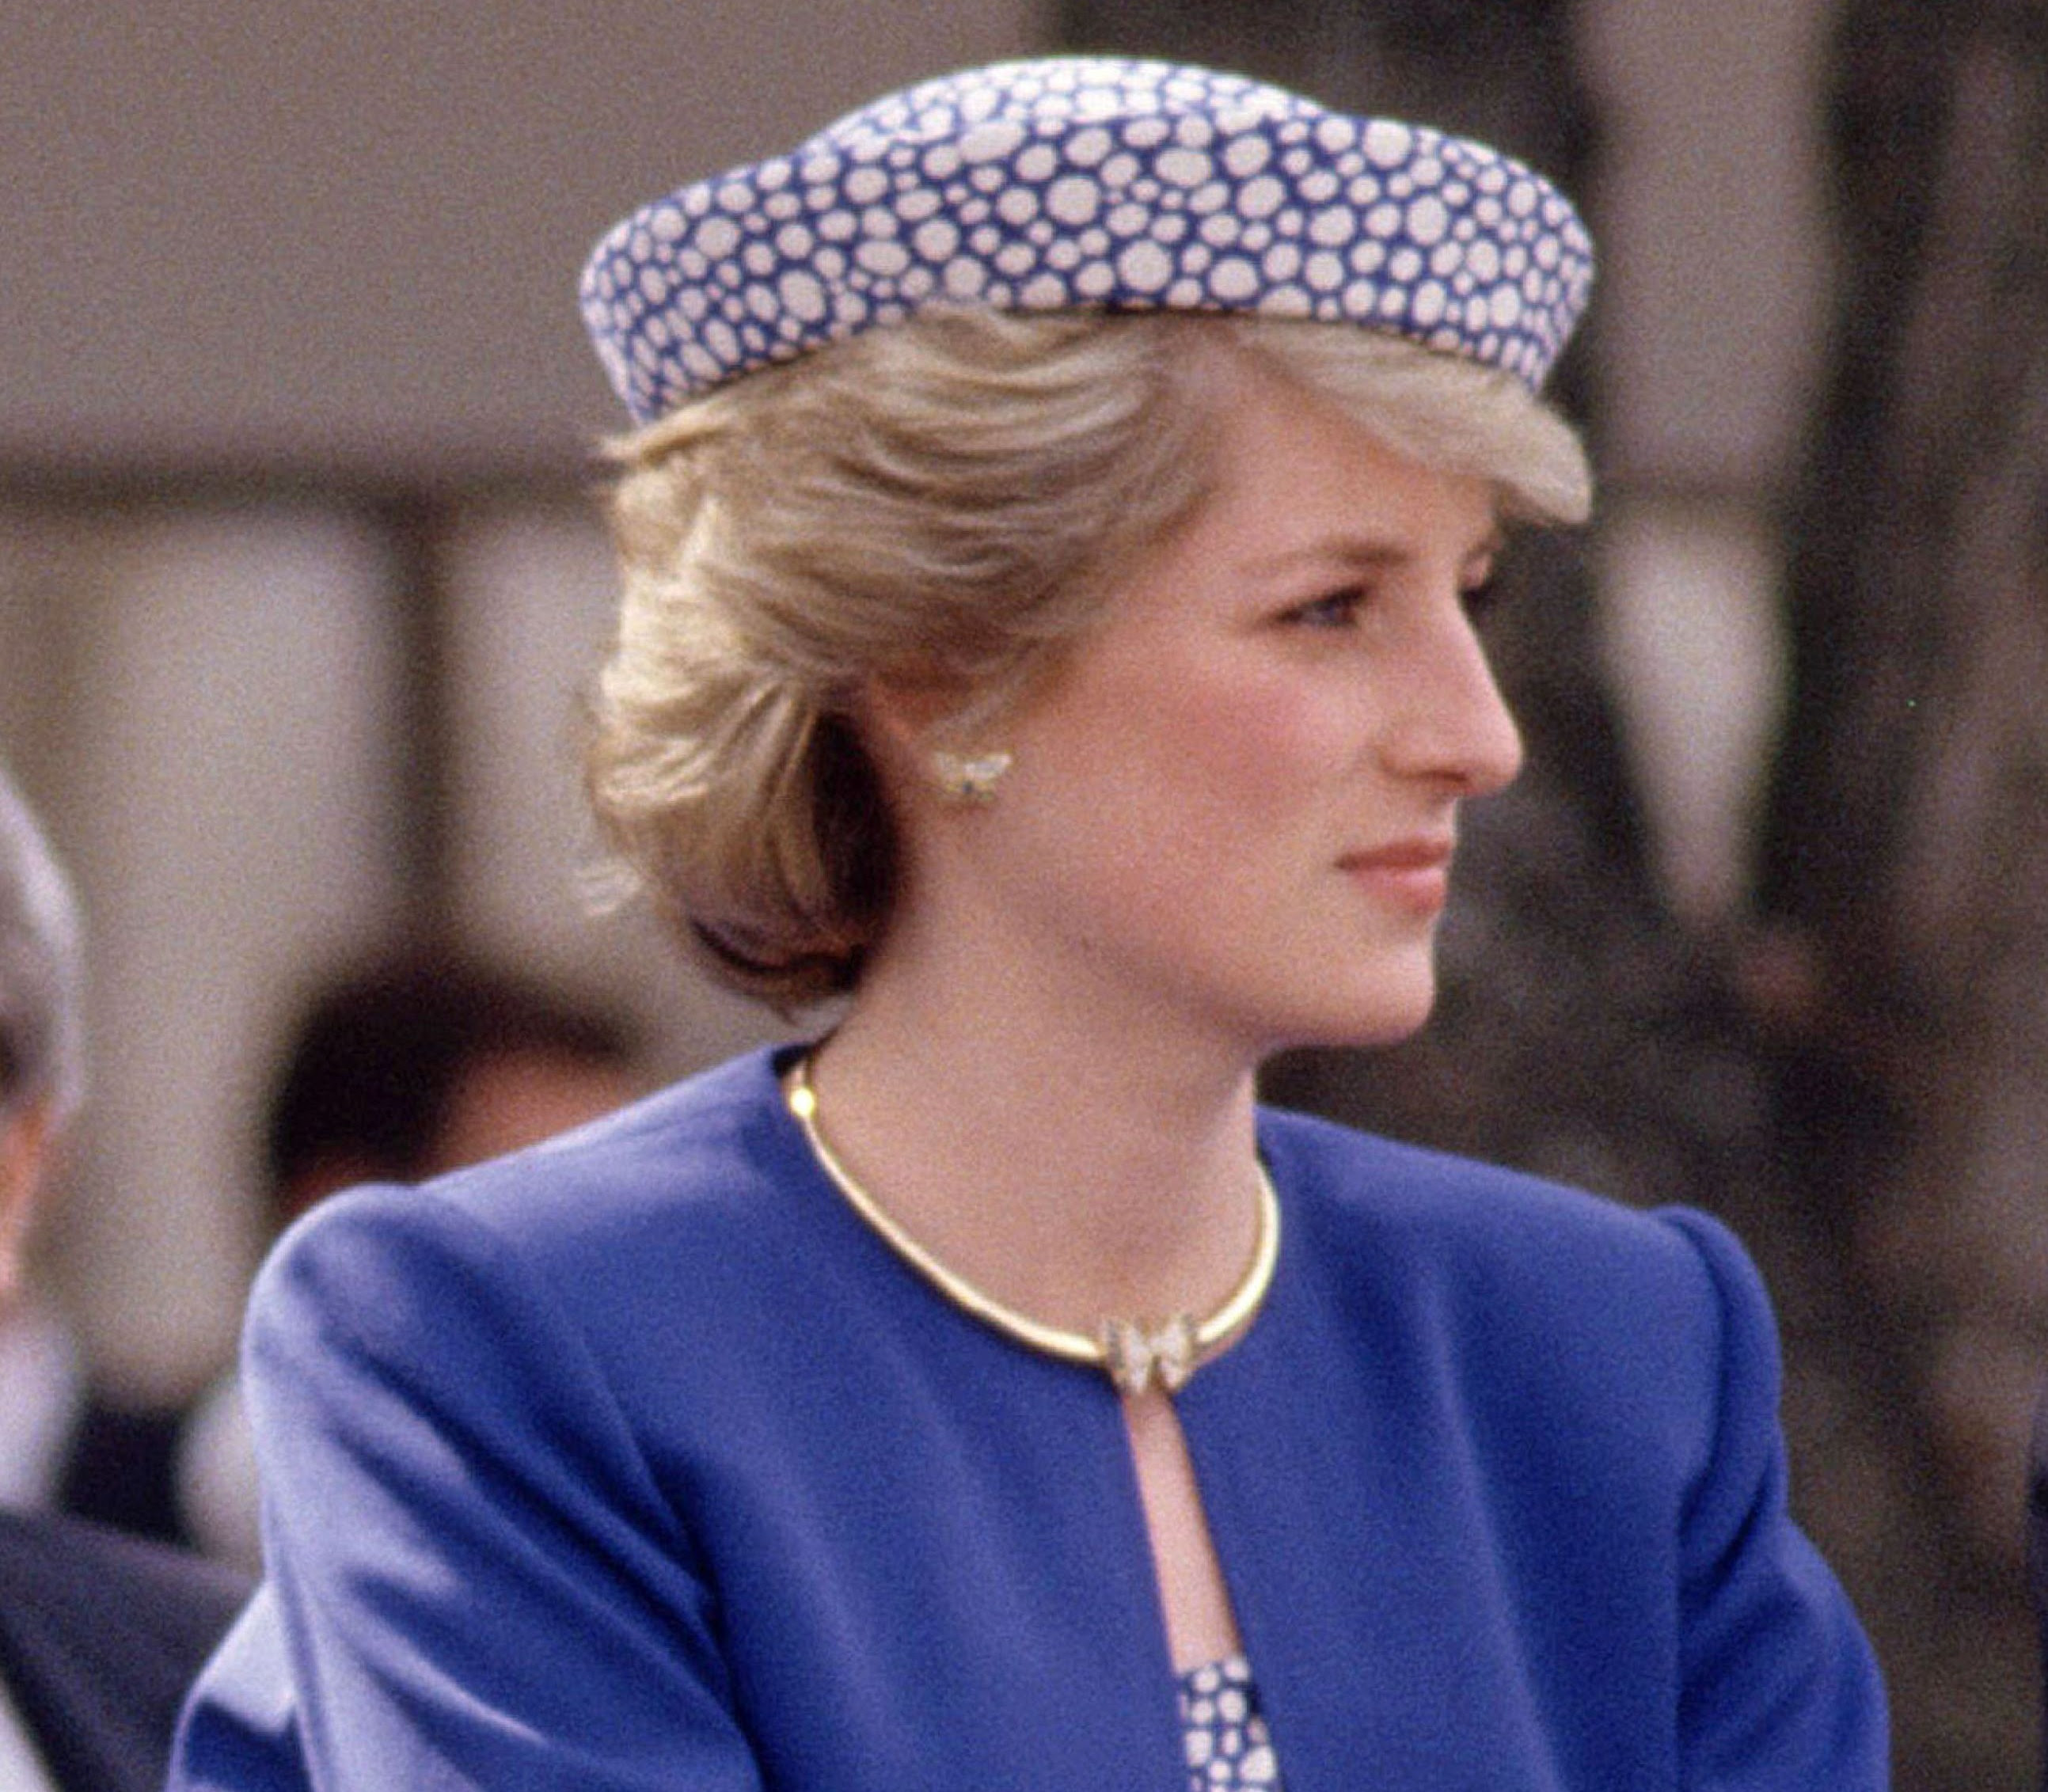 The late princess wore the butterfly stud earrings with a necklace, which hasn't been seen on Meghan or Kate yet